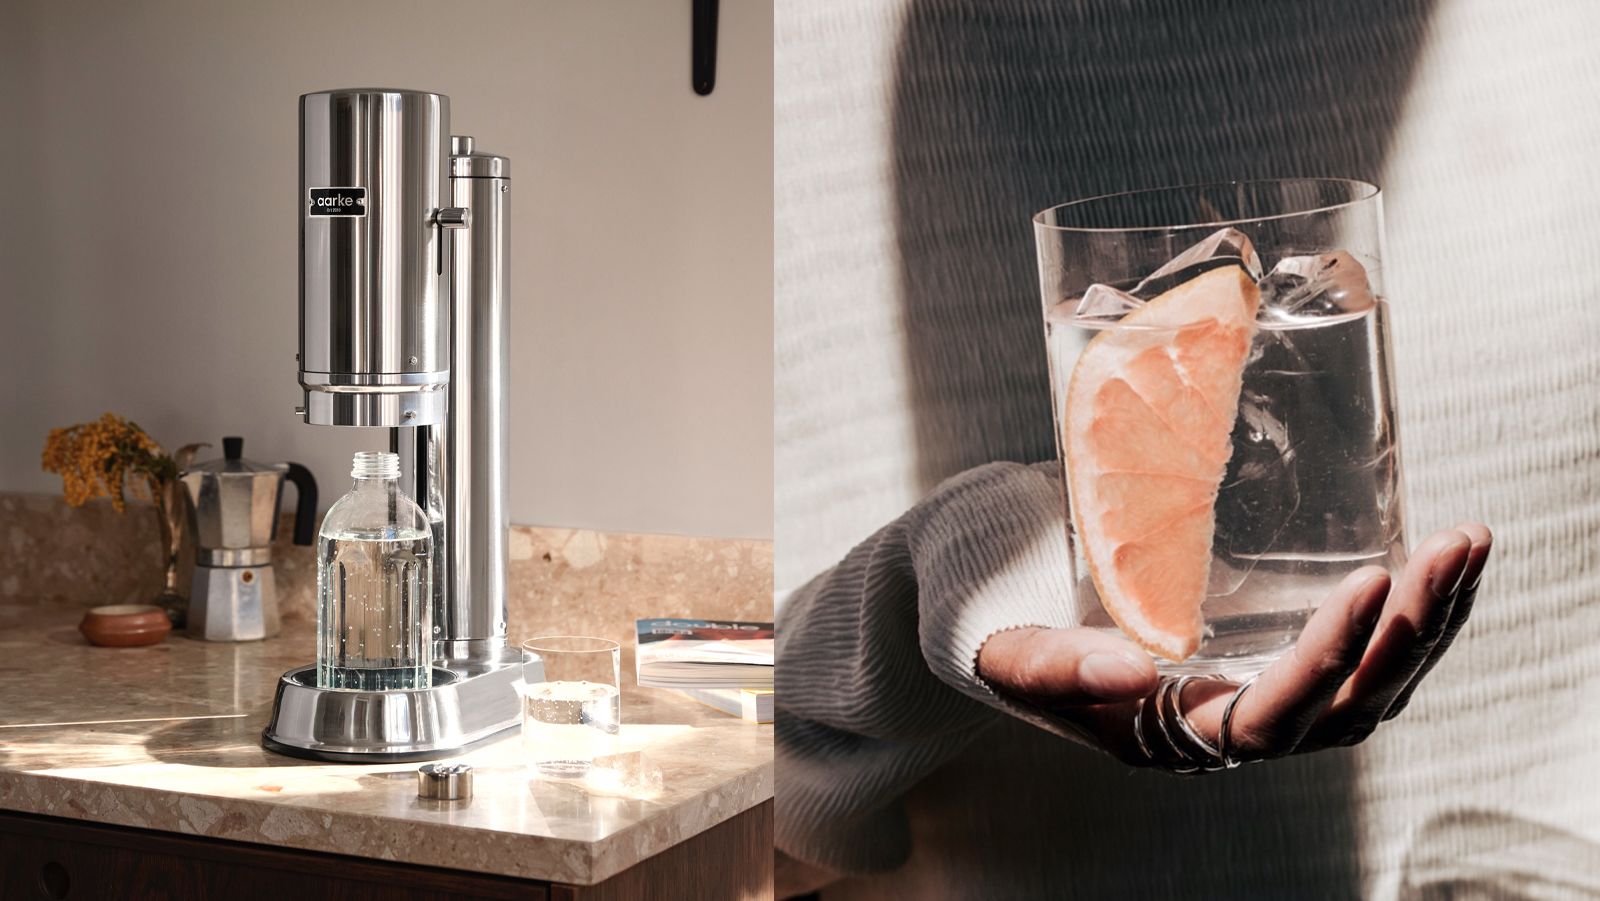 The sleek Aarke Carbonator Pro creates perfectly fizzy water with the press of a button | CNN Underscored